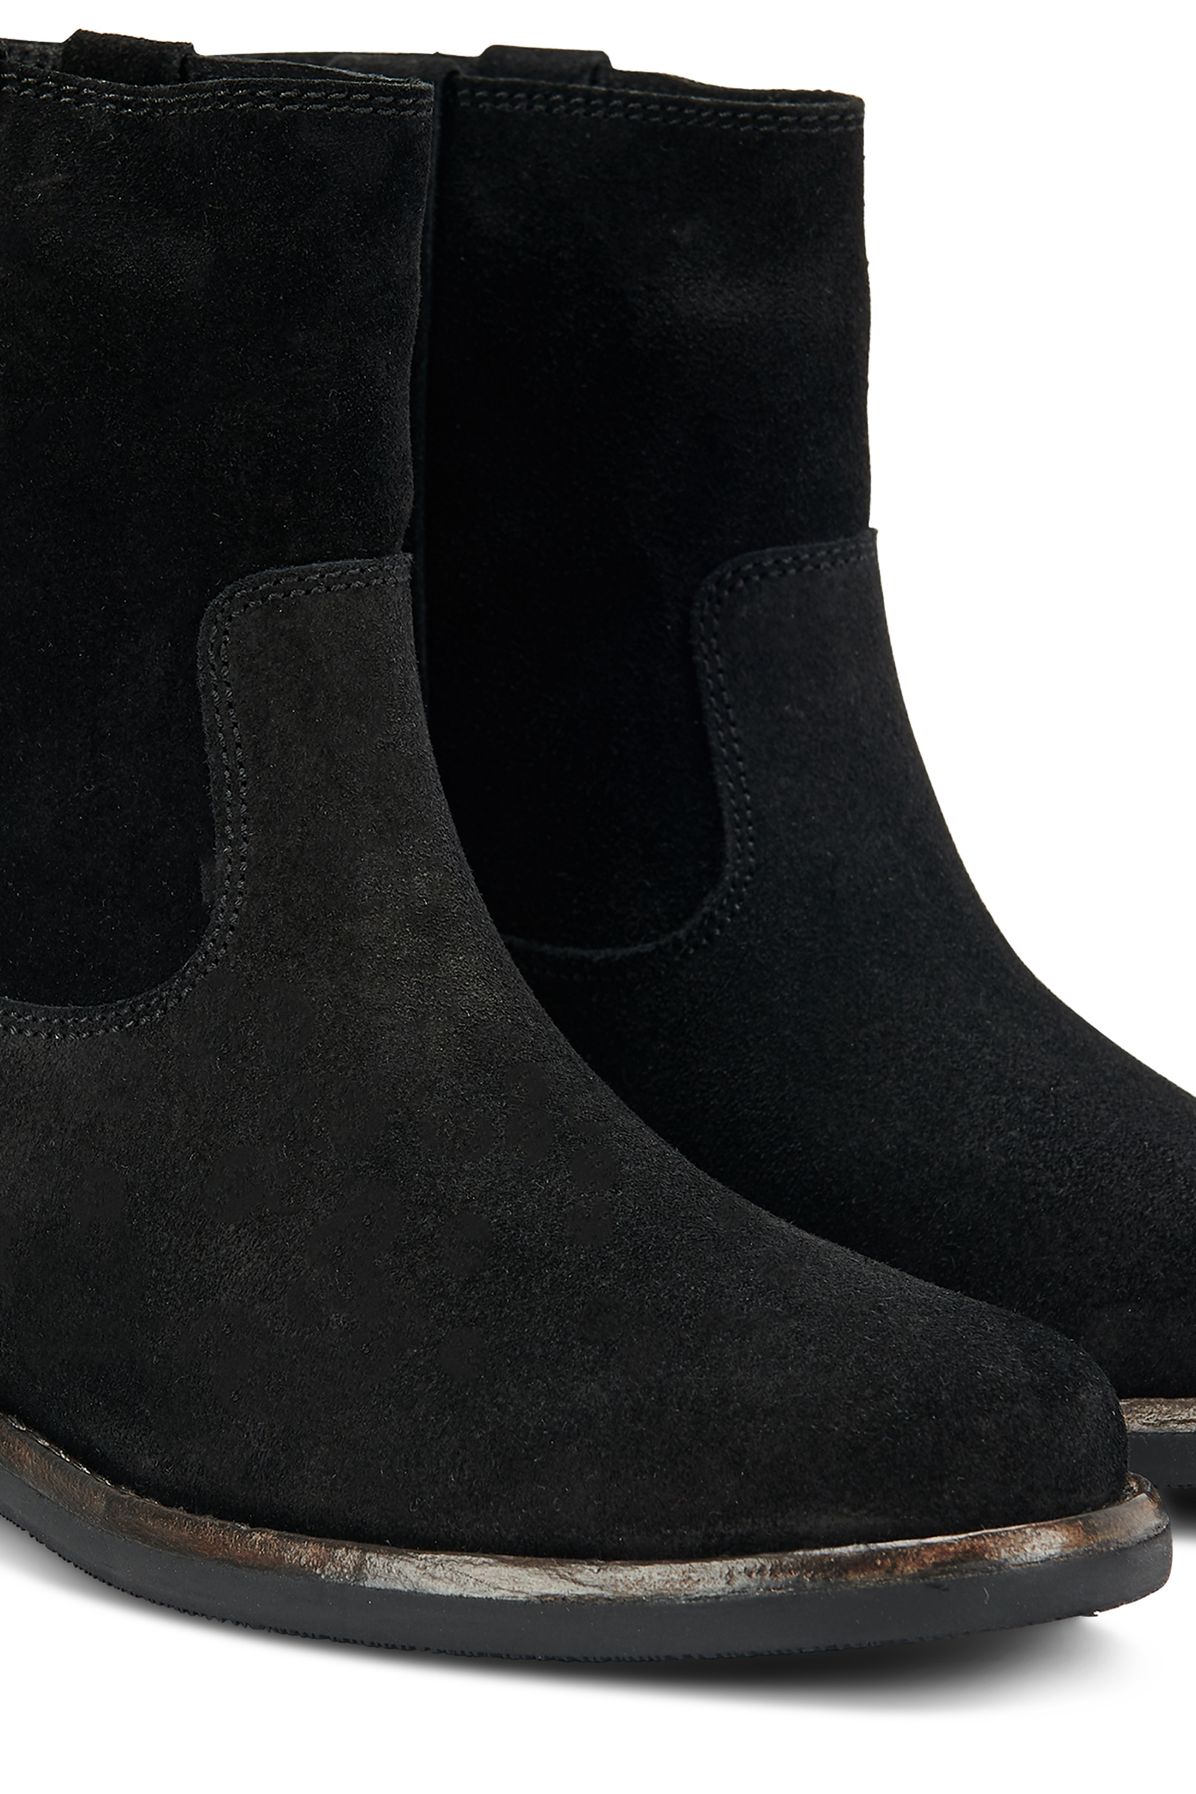 Isabel Marant Susee ankle boots